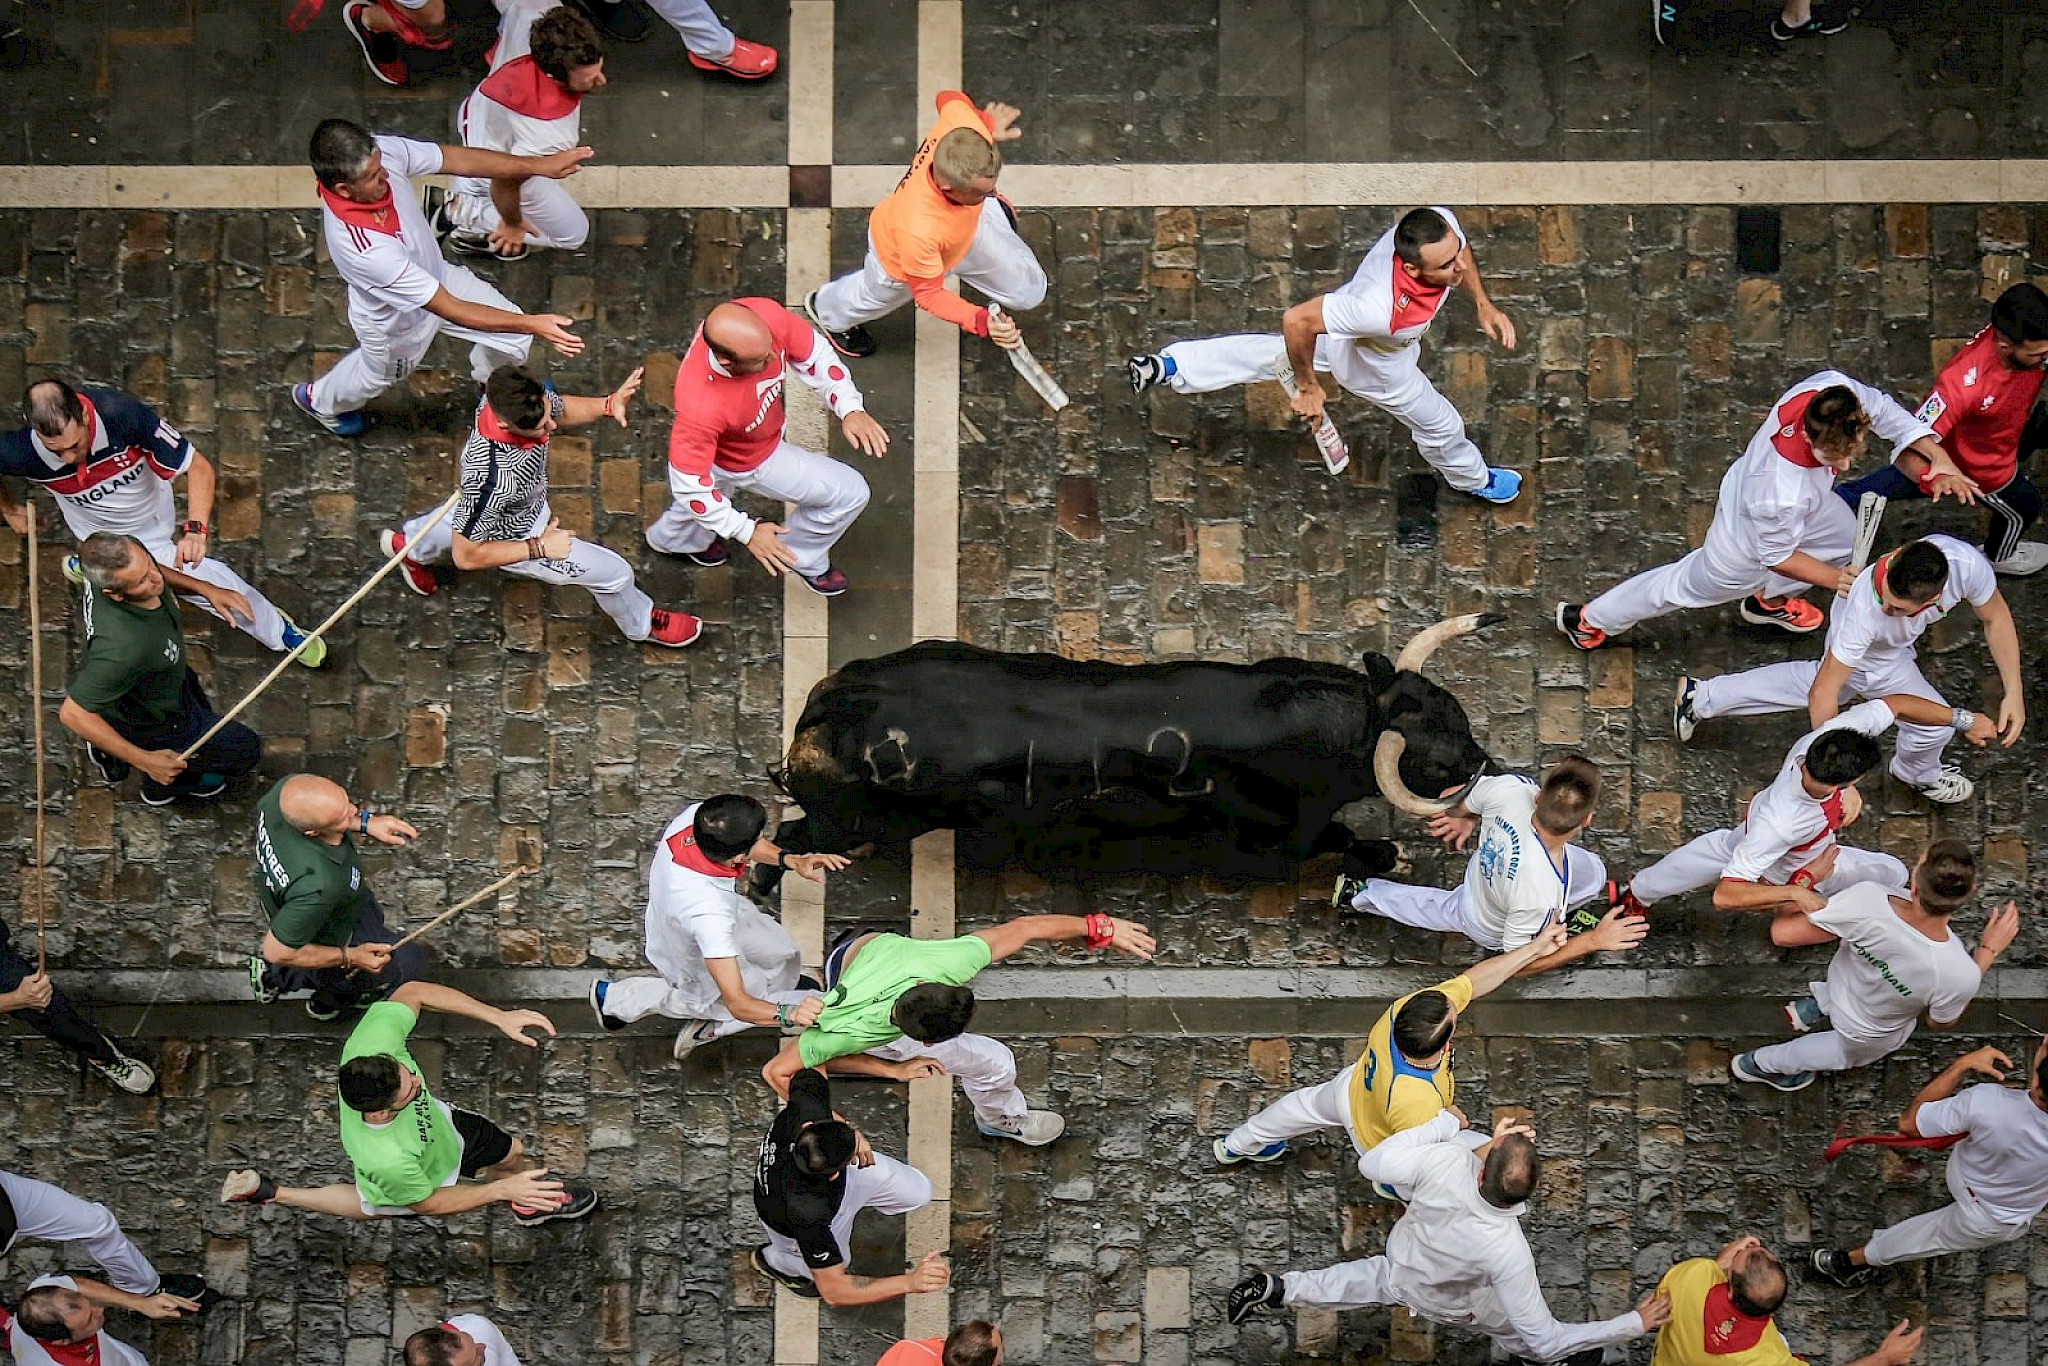 Welcome to the San Fermin Festival in Pamplona (Spain)